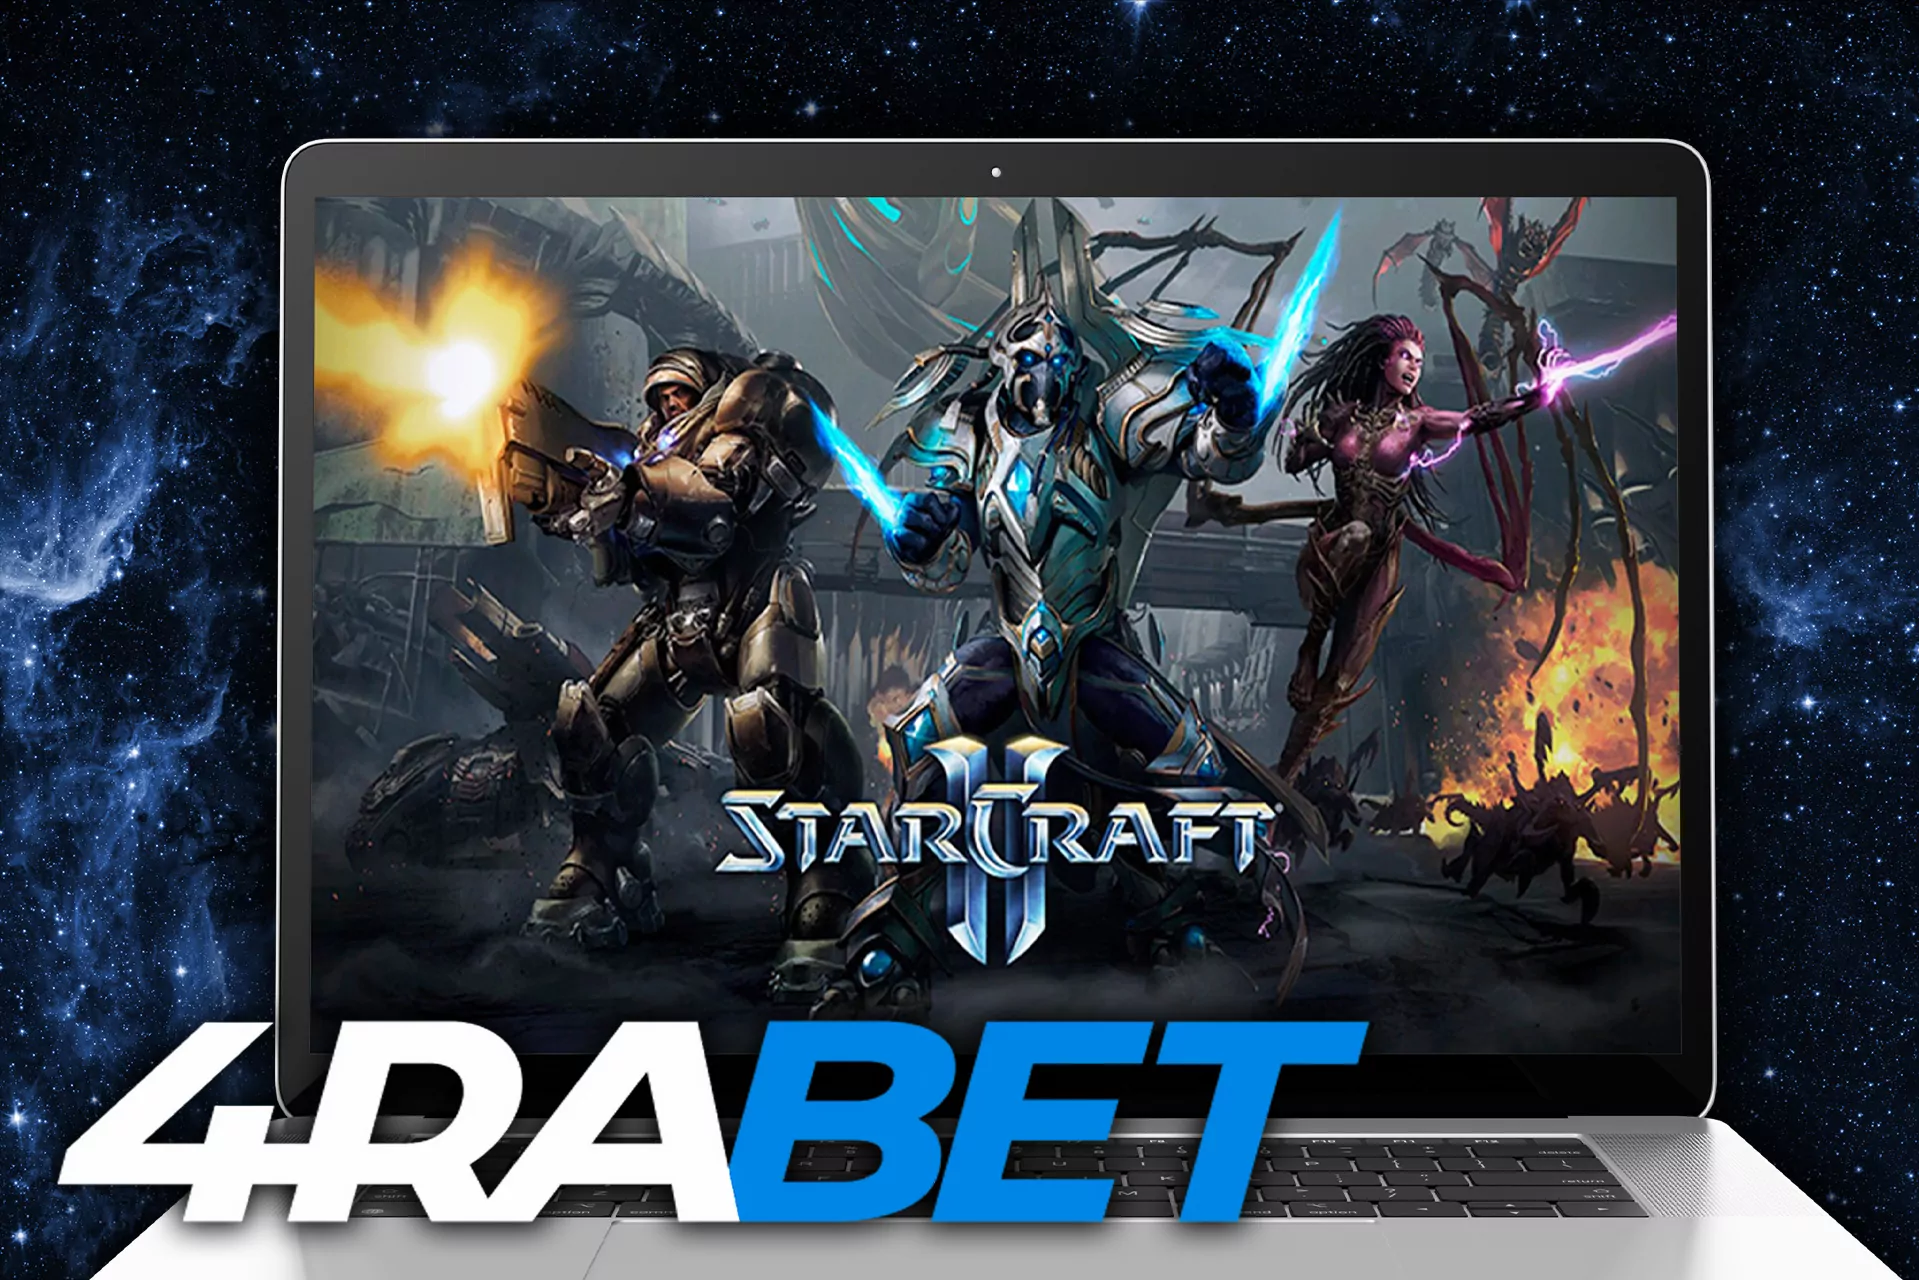 Starcraft 2 is in the betting line of 4rabet.